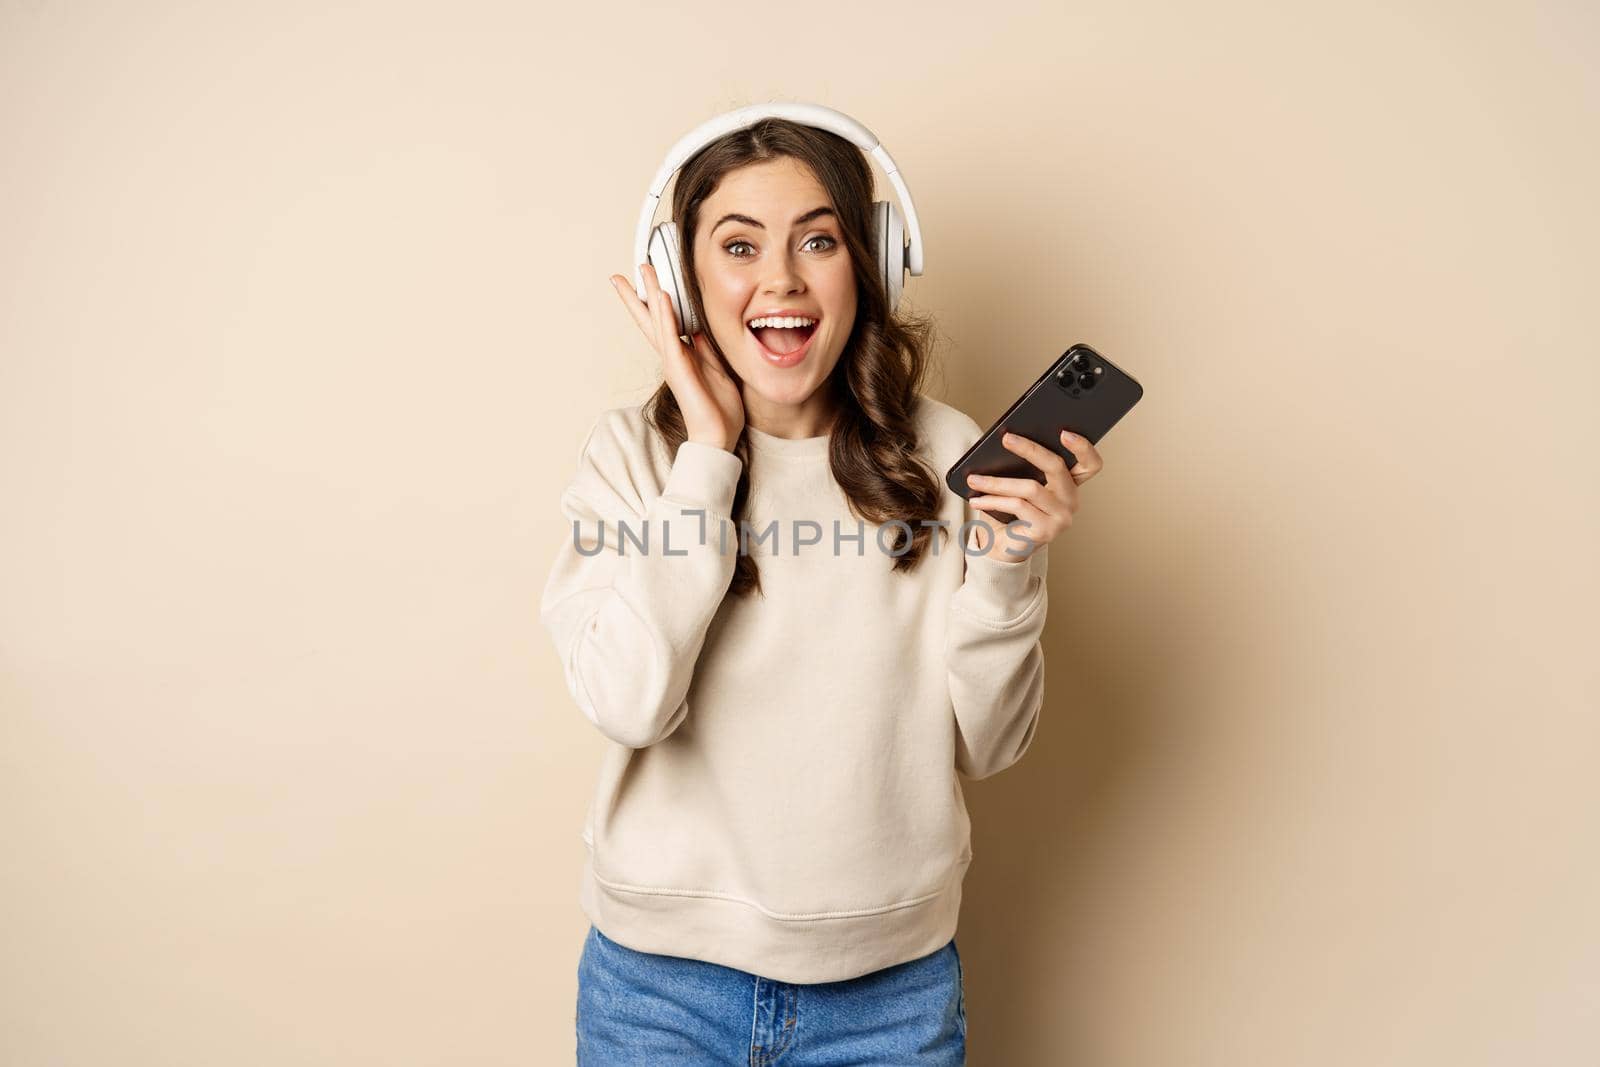 Smiling happy woman listening music in headphones on smartphone, laughing excited, standing over beige background.